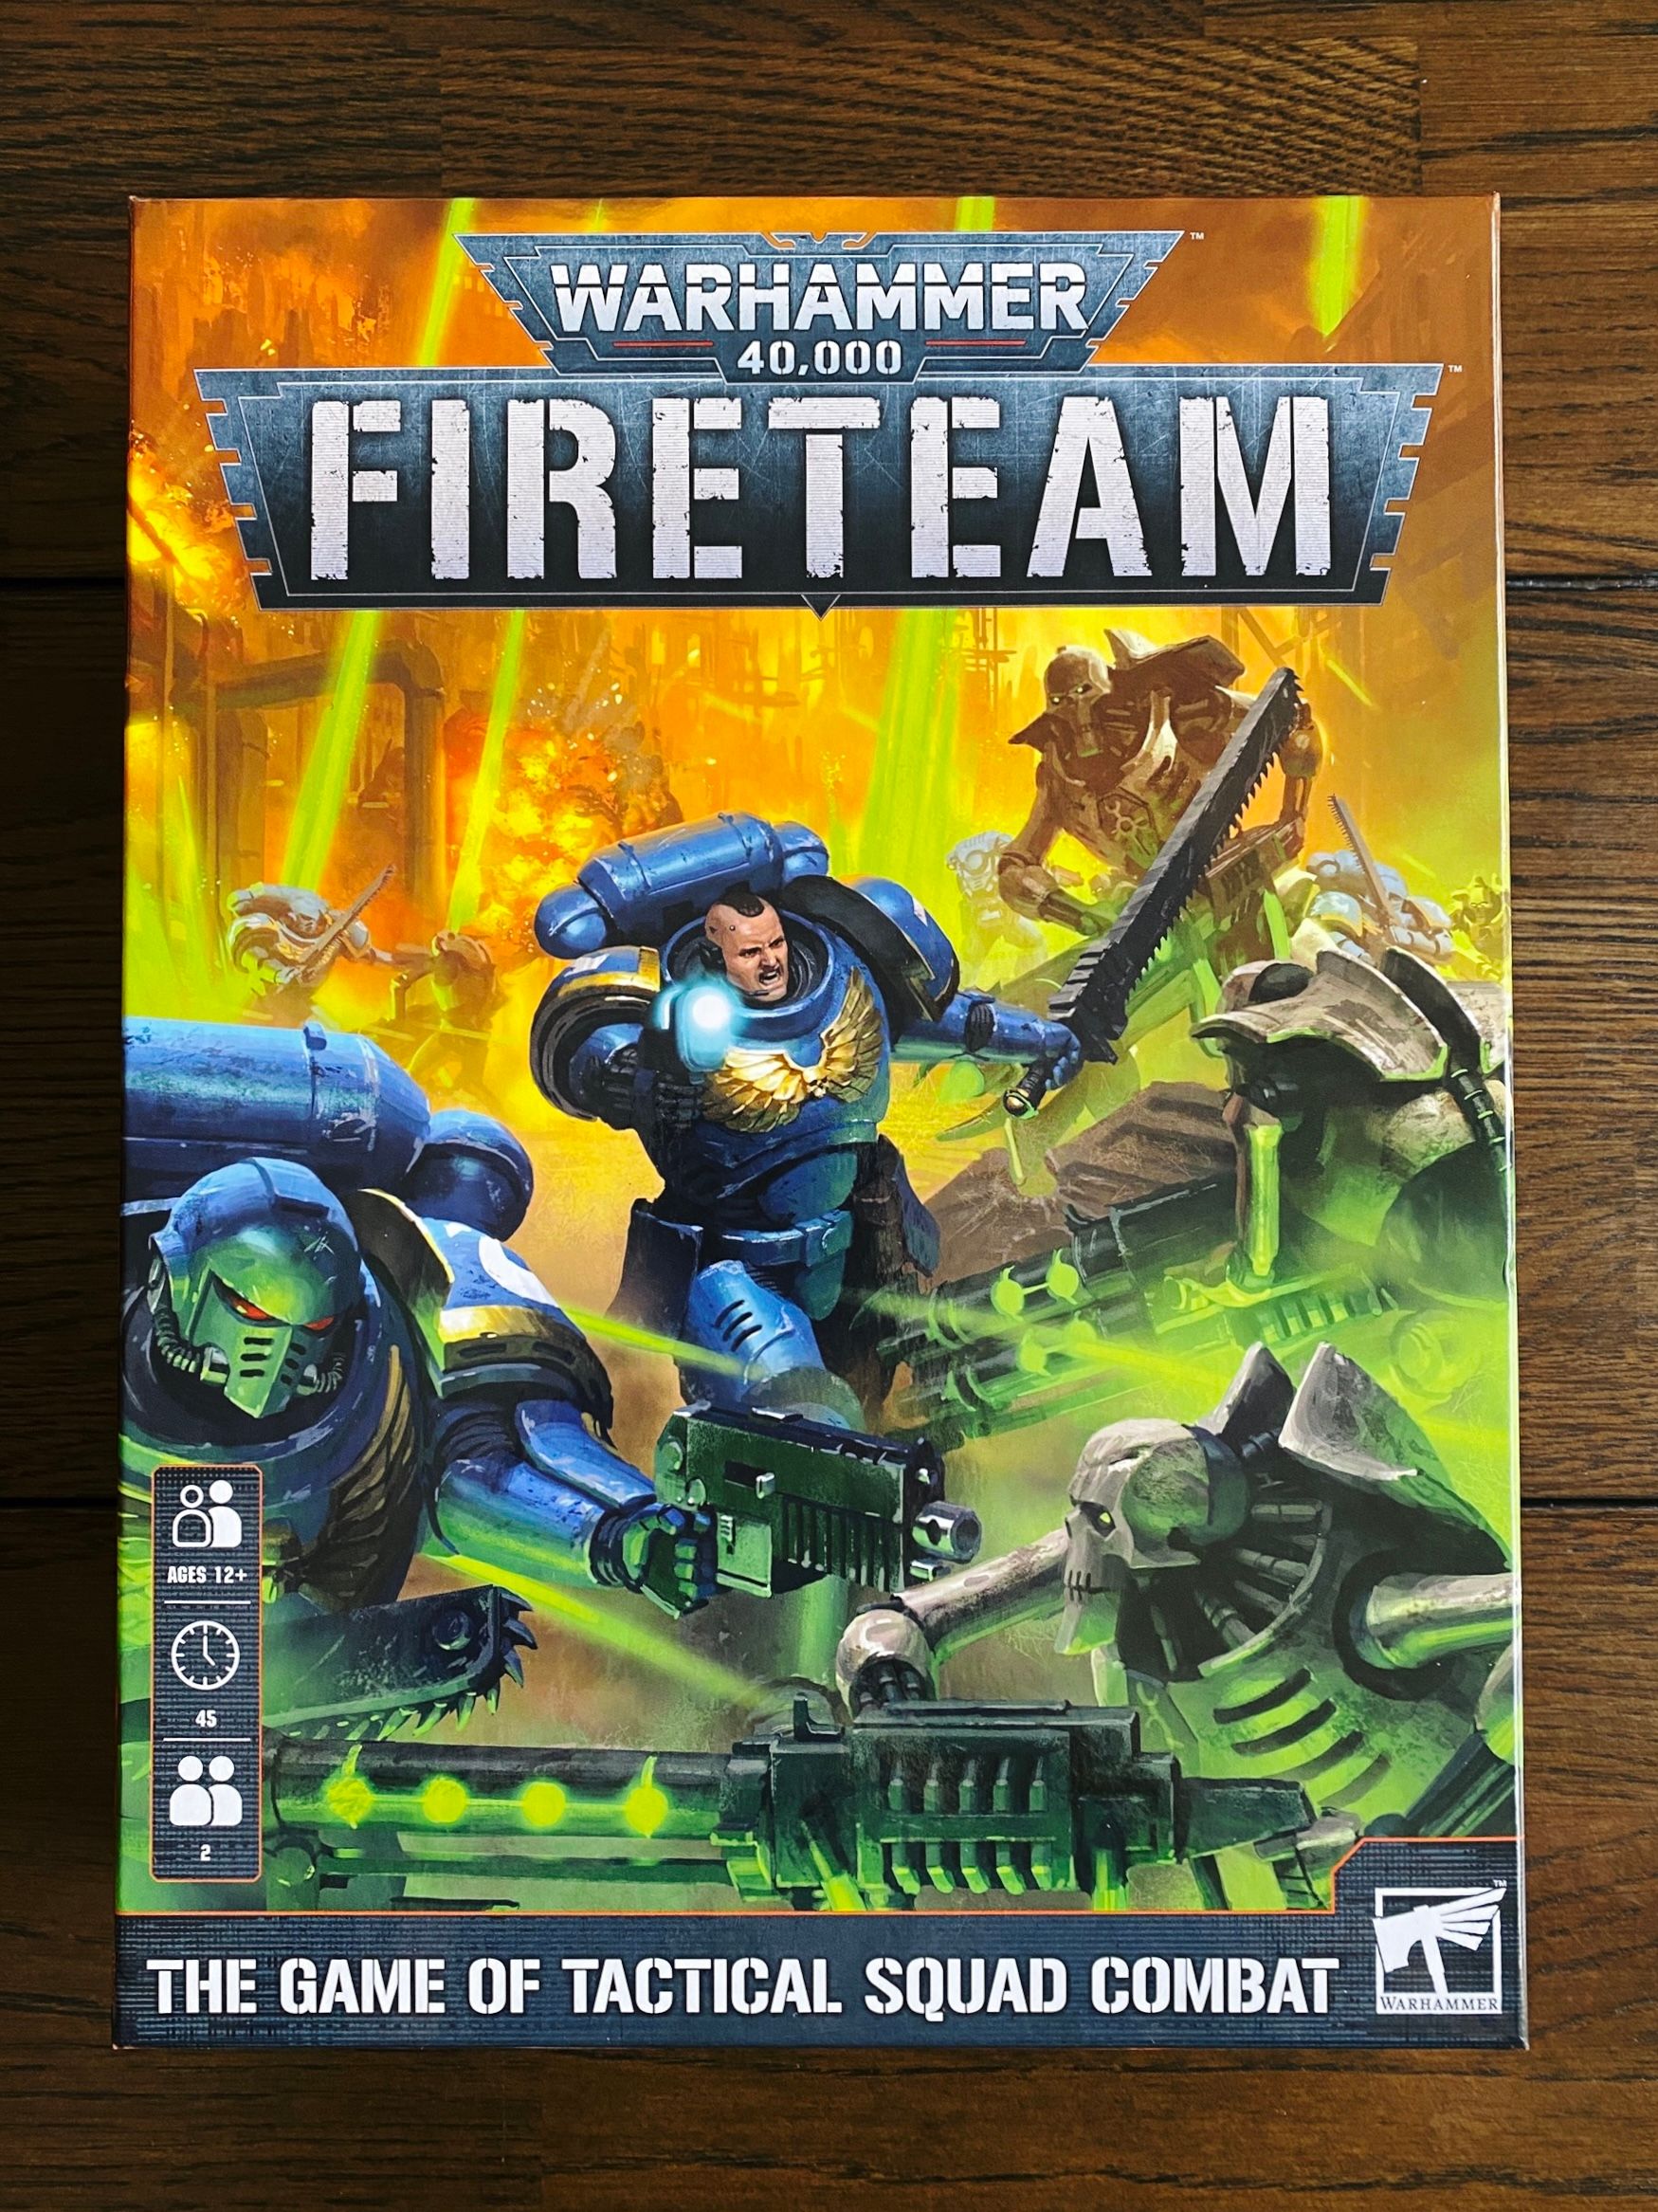 A photo of the box of Warhammer 40,000: Fireteam. The artwork consists of two Space Marines clad in blue power armour in the midst of a number of grey metal Terminator-looking robots.